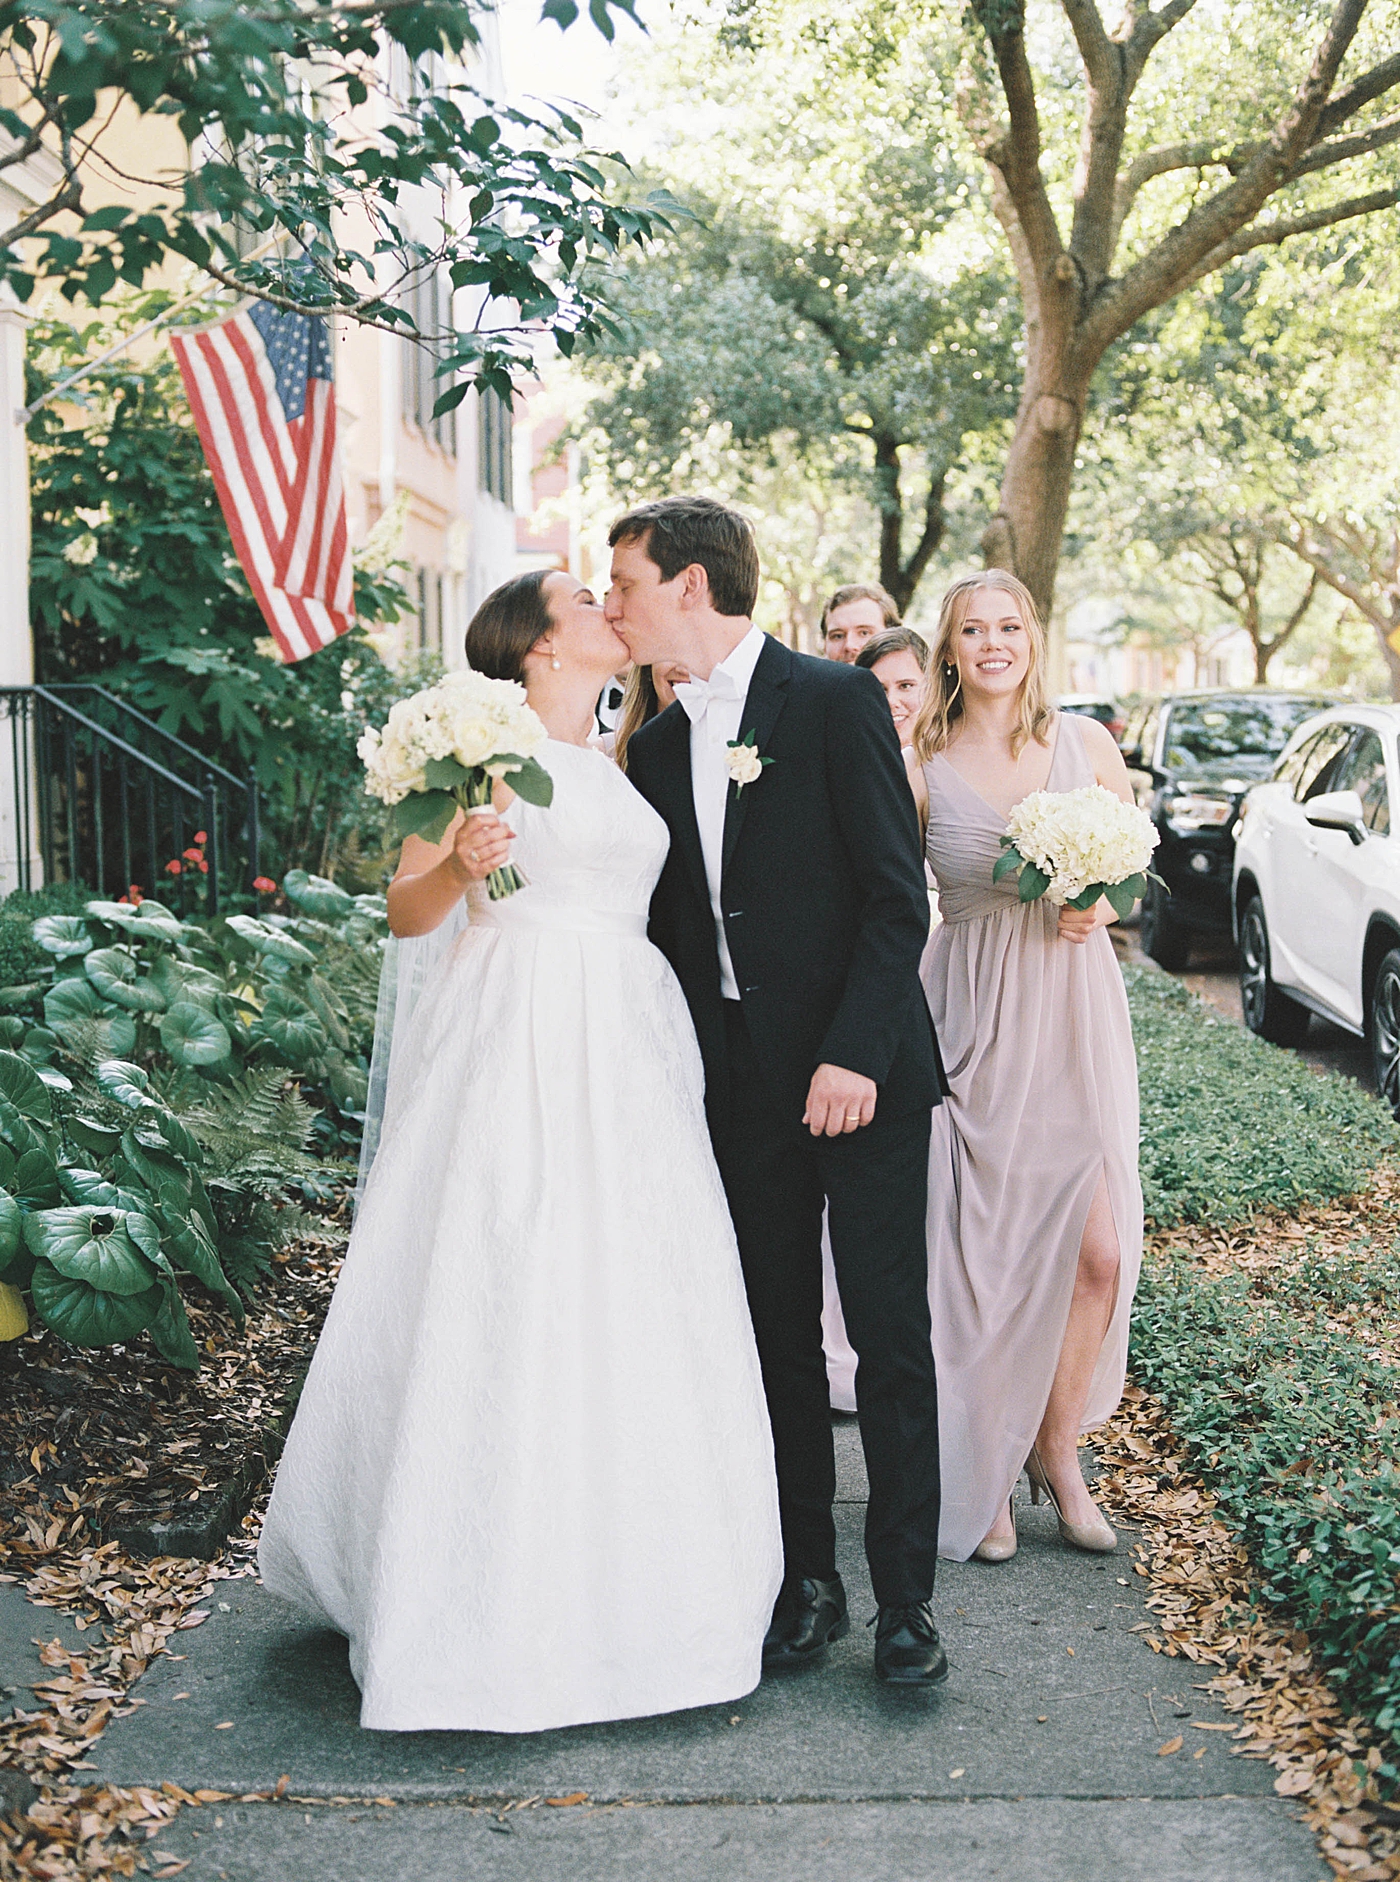 Bride and groom kissing during their Intimate spring wedding | Carters Event Co